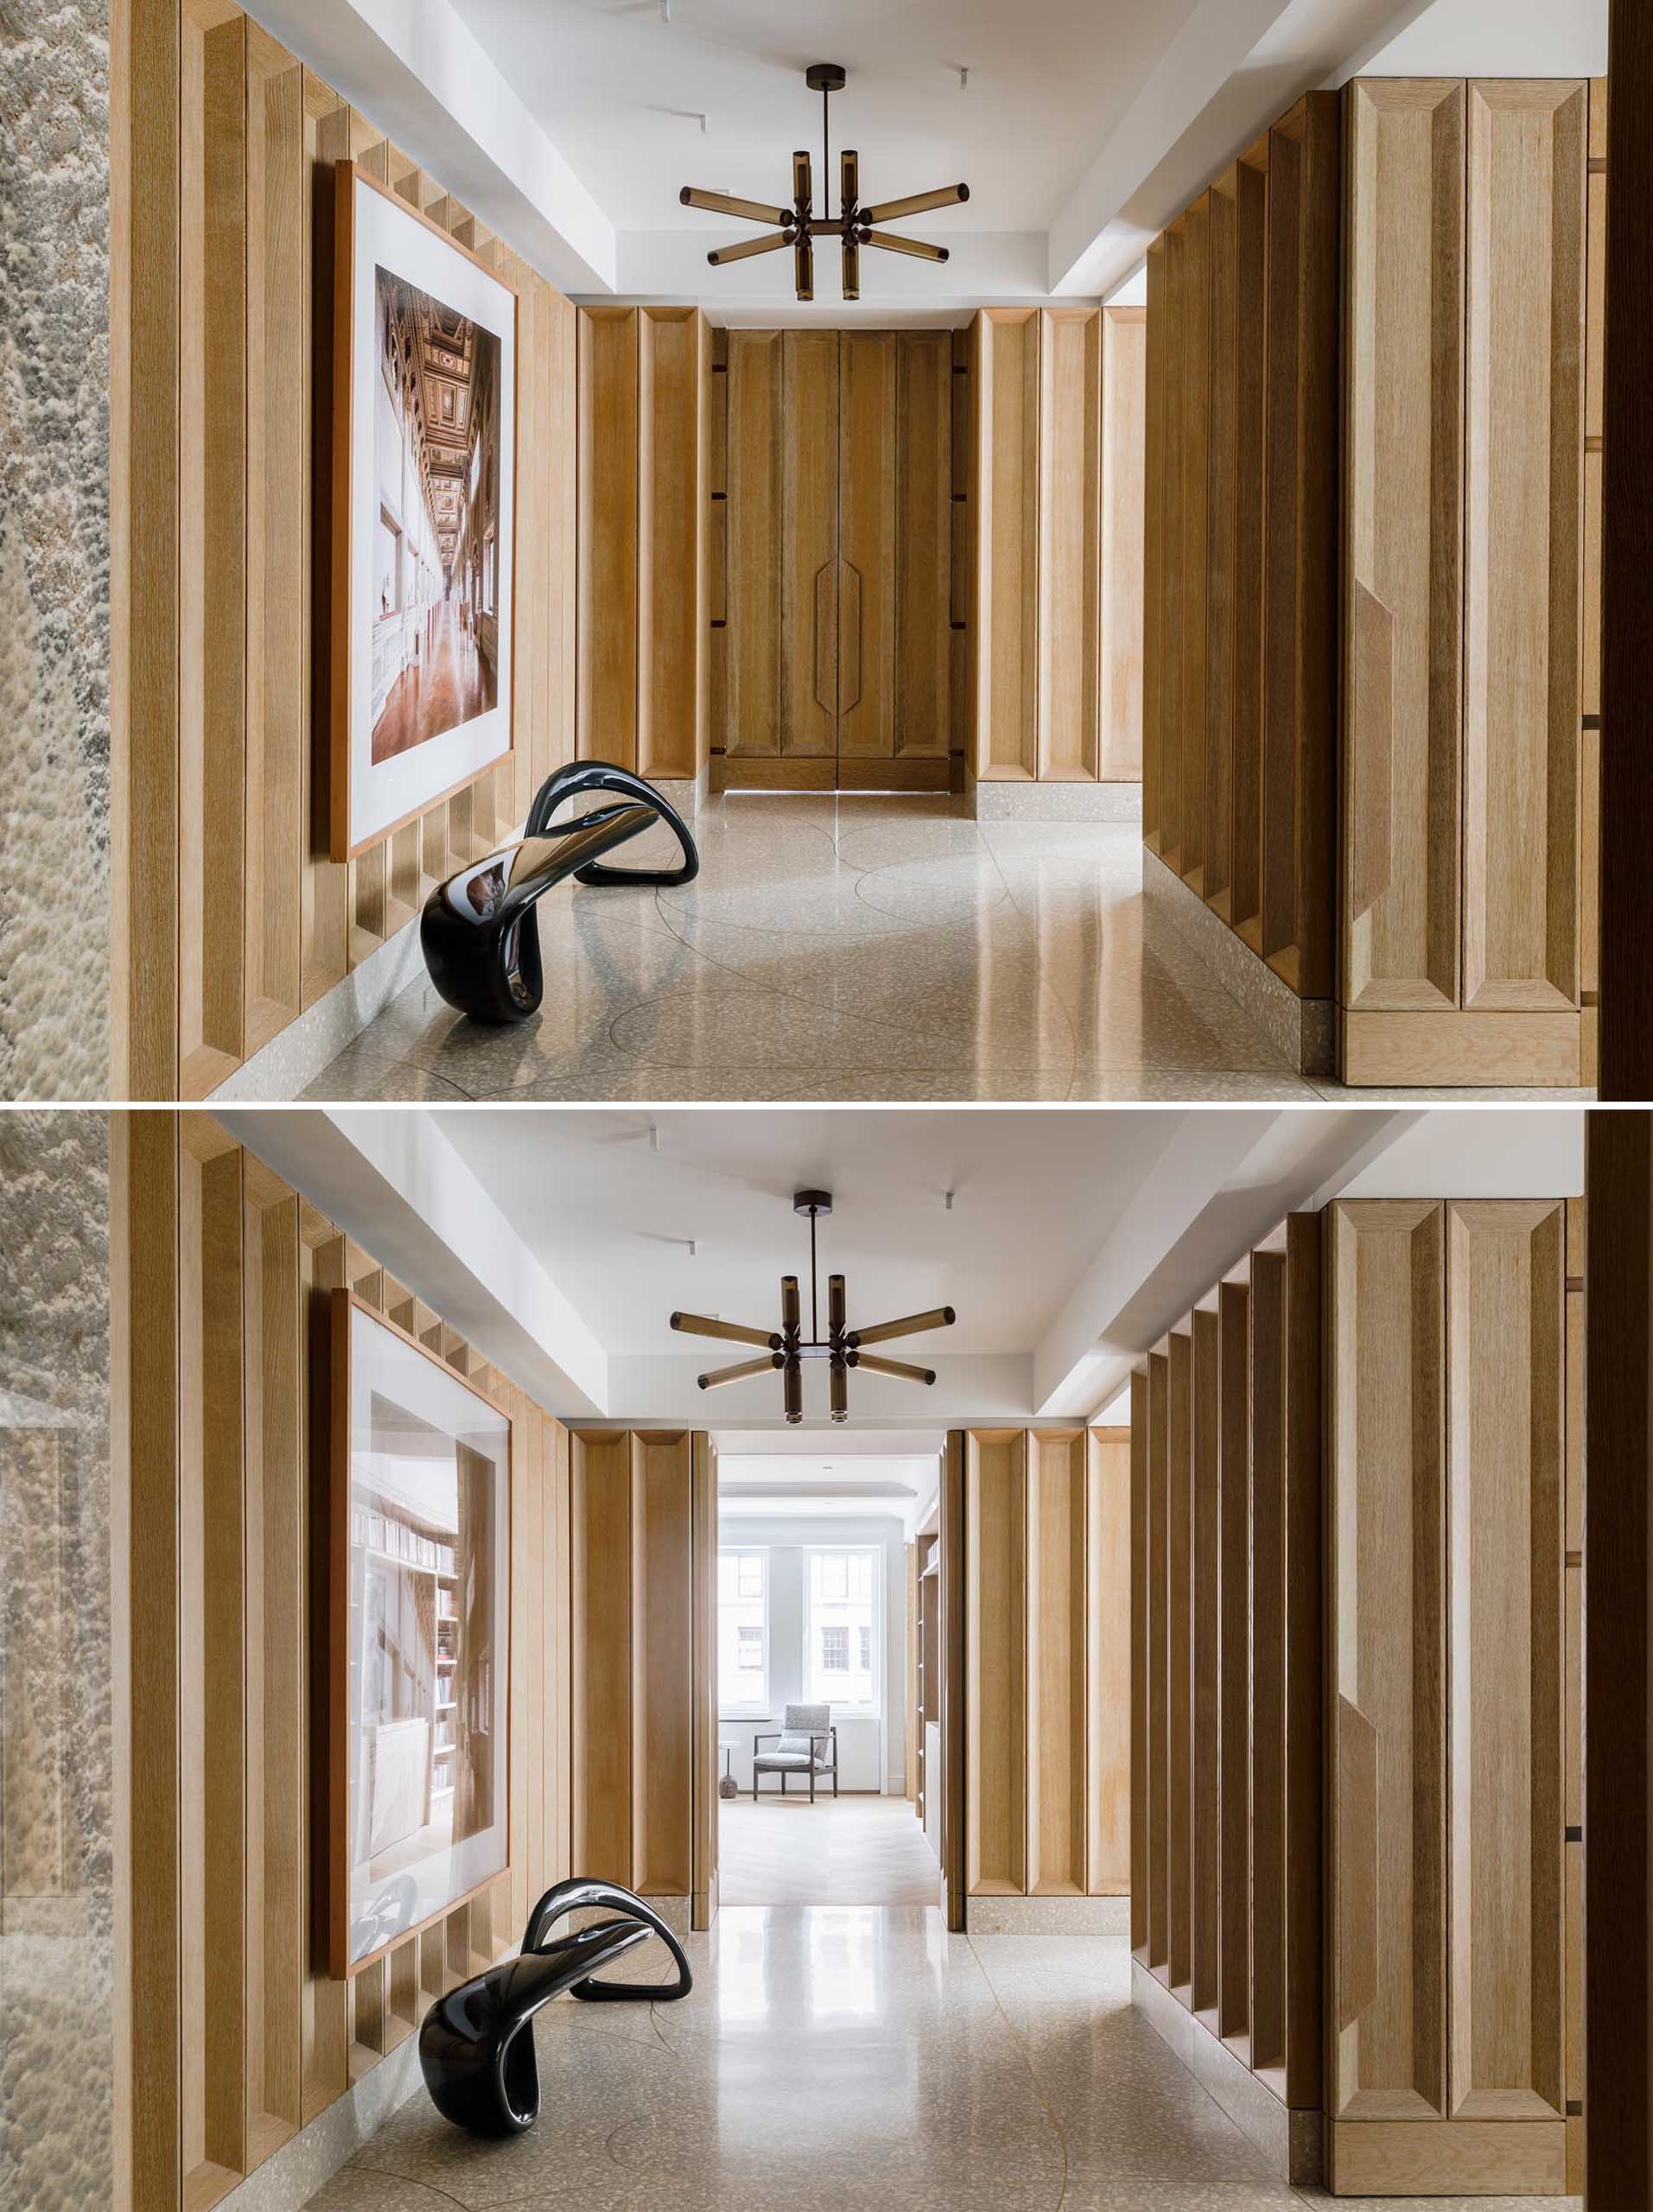 This entryway and gallery includes deep coffered paneling in cerused white oak, custom terrazzo floor with hand bent brass inlay, two “Castle” pendants by Jason Miller for Roll and Hill, photo artwork by Candida Hofer, and a fiberglass bench by Brodie Neill.